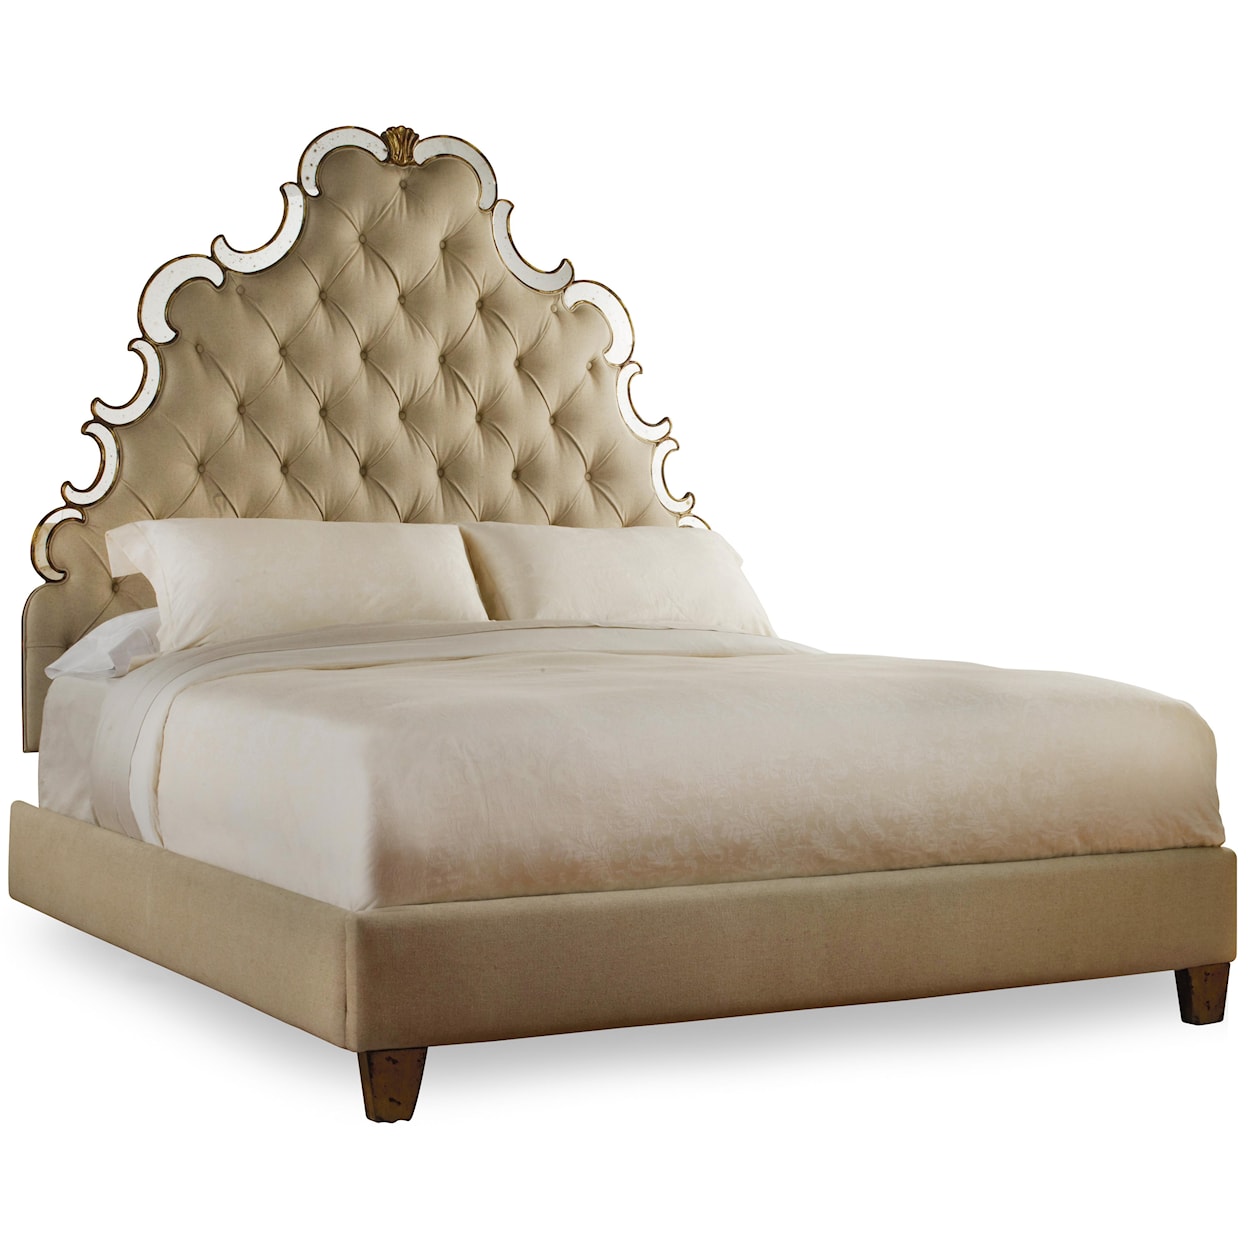 Hooker Furniture Sanctuary Queen Tufted Bed